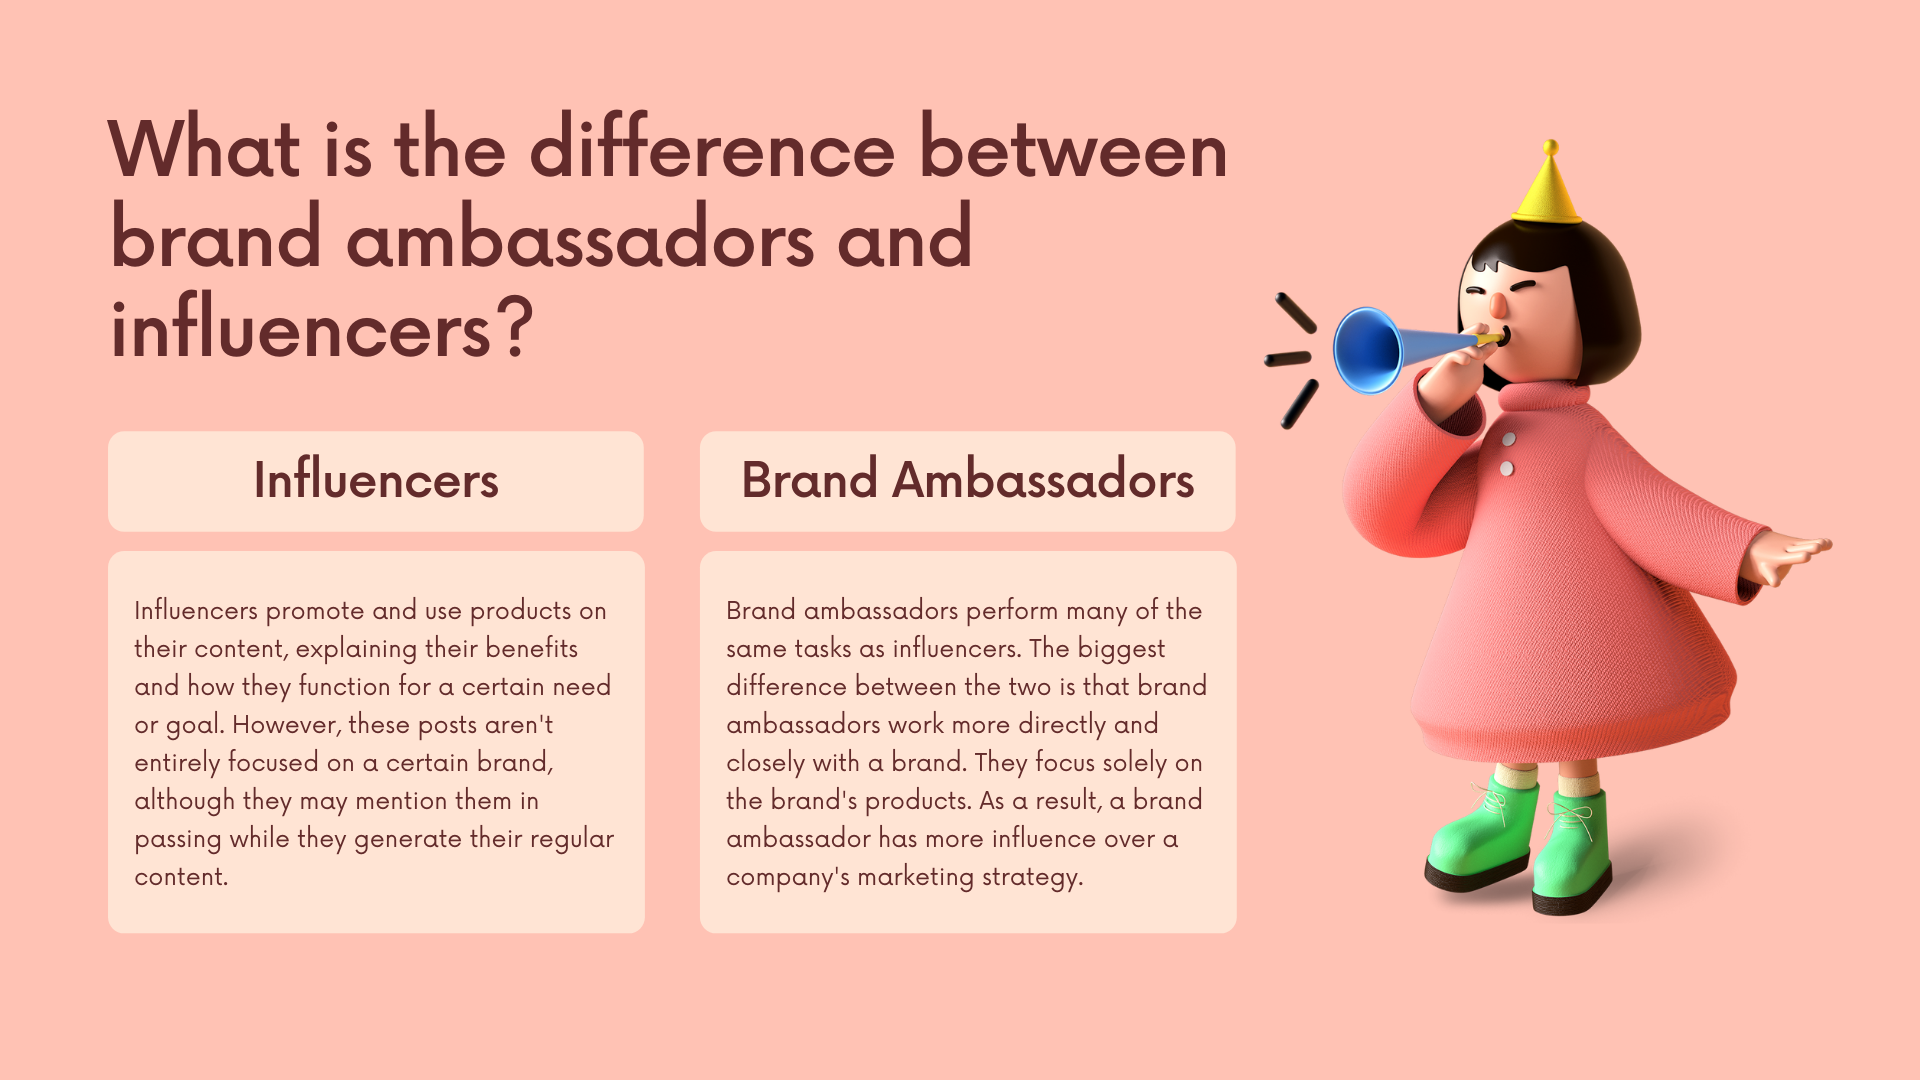 What Is a Brand Ambassador?